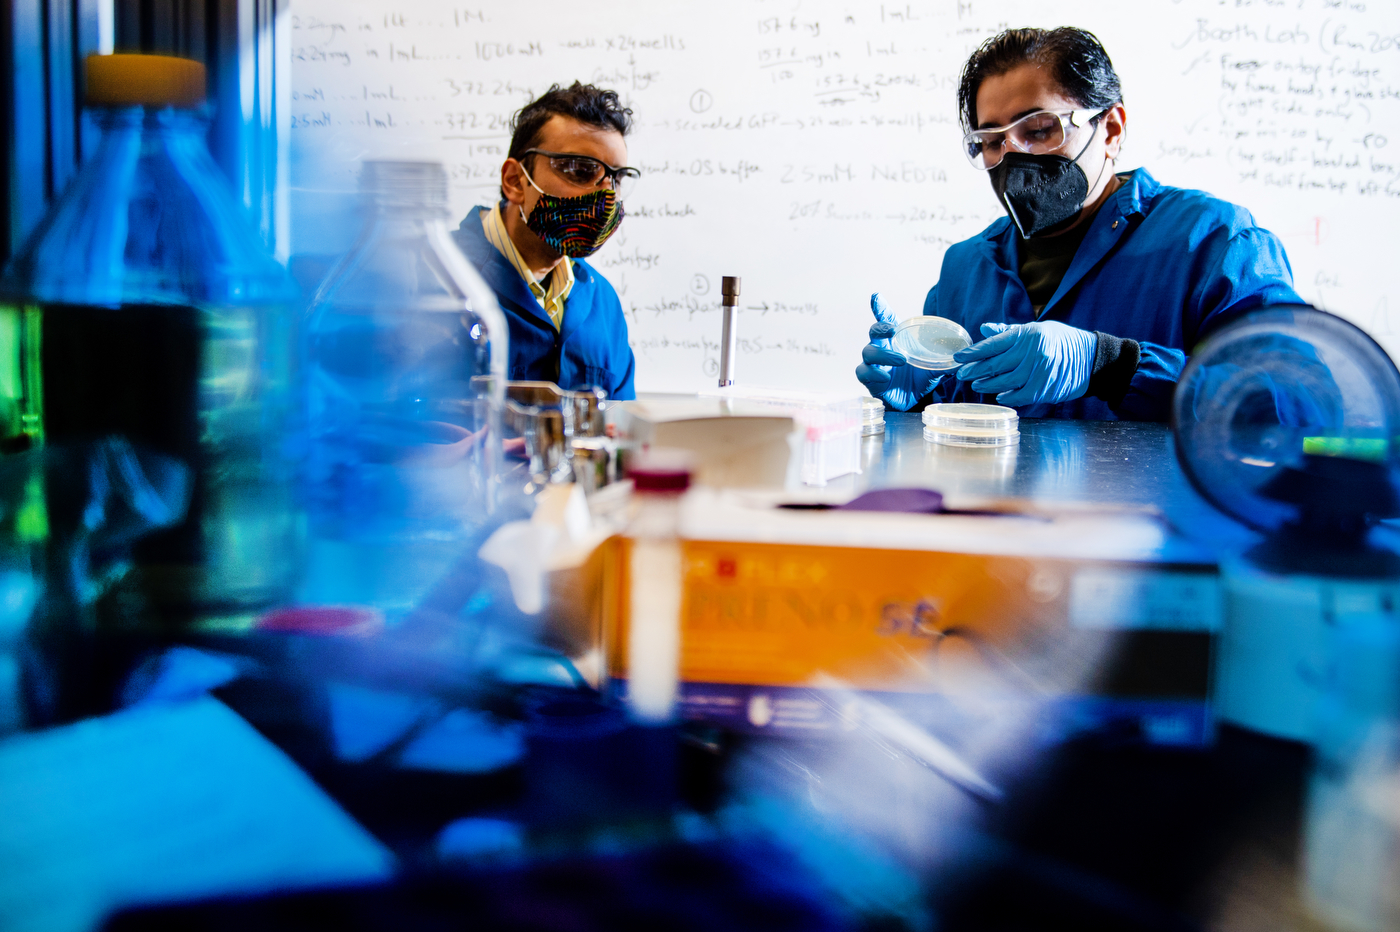 Neel Joshi, associate professor of chemistry and chemical biology, and Avinash Manjula-Basavanna, a postdoctoral researcher, work on programmable microbial ink for 3D printing of living materials, in the Mugar Life Sciences building. Photo by Matthew Modoono/Northeastern University.